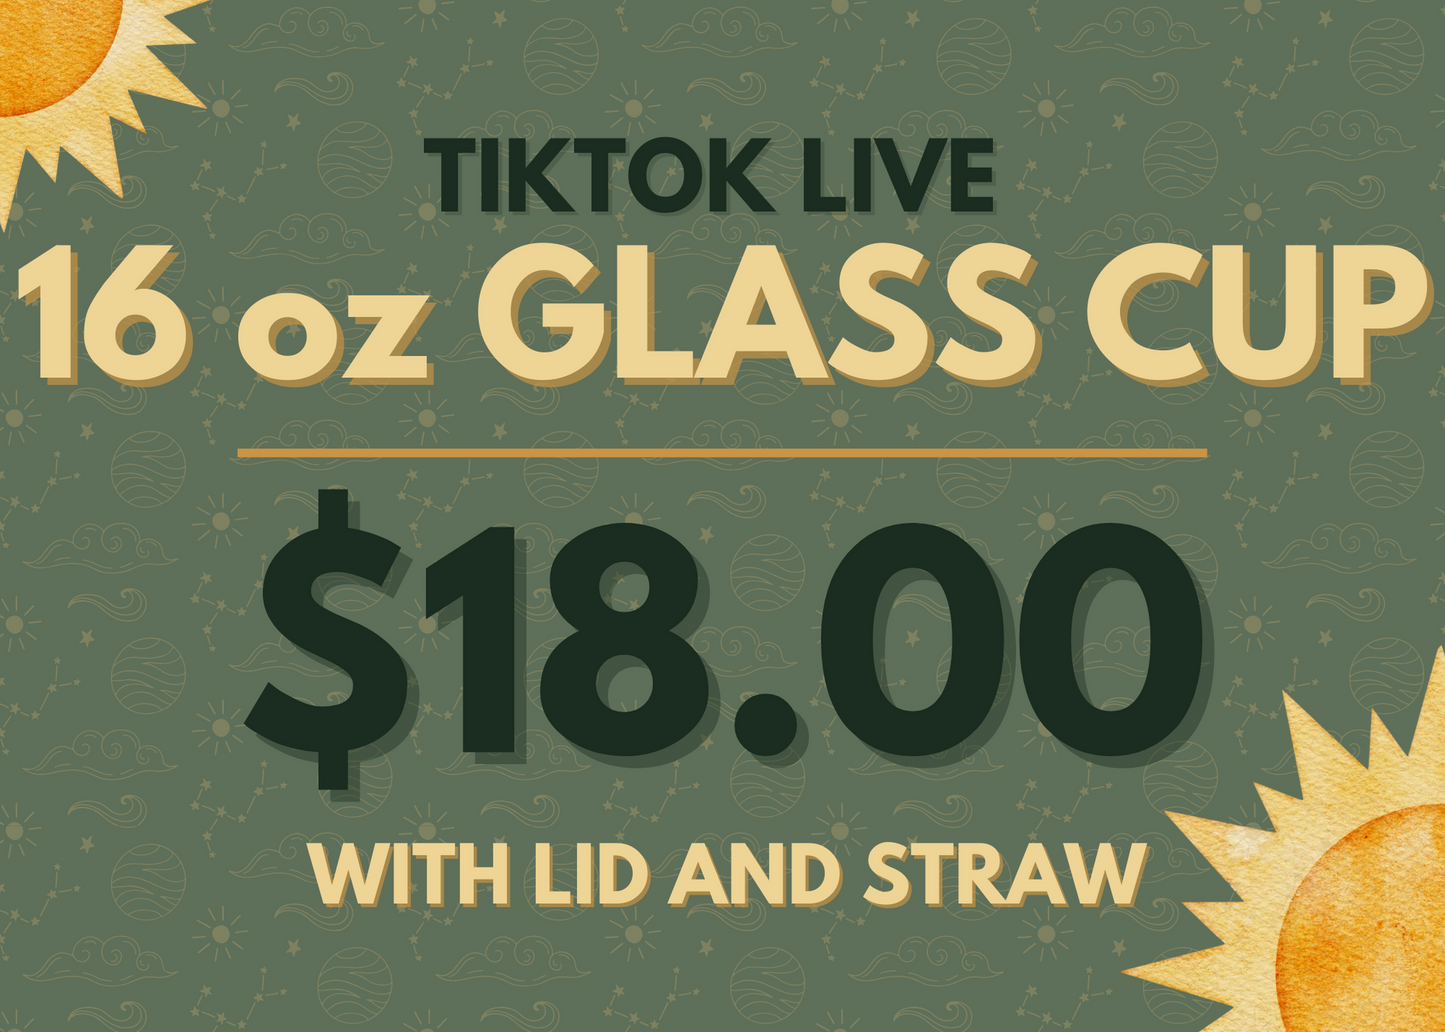 TIKTOK LIVE - GLASS CUP WITH LID AND STRAW - YOU PICK